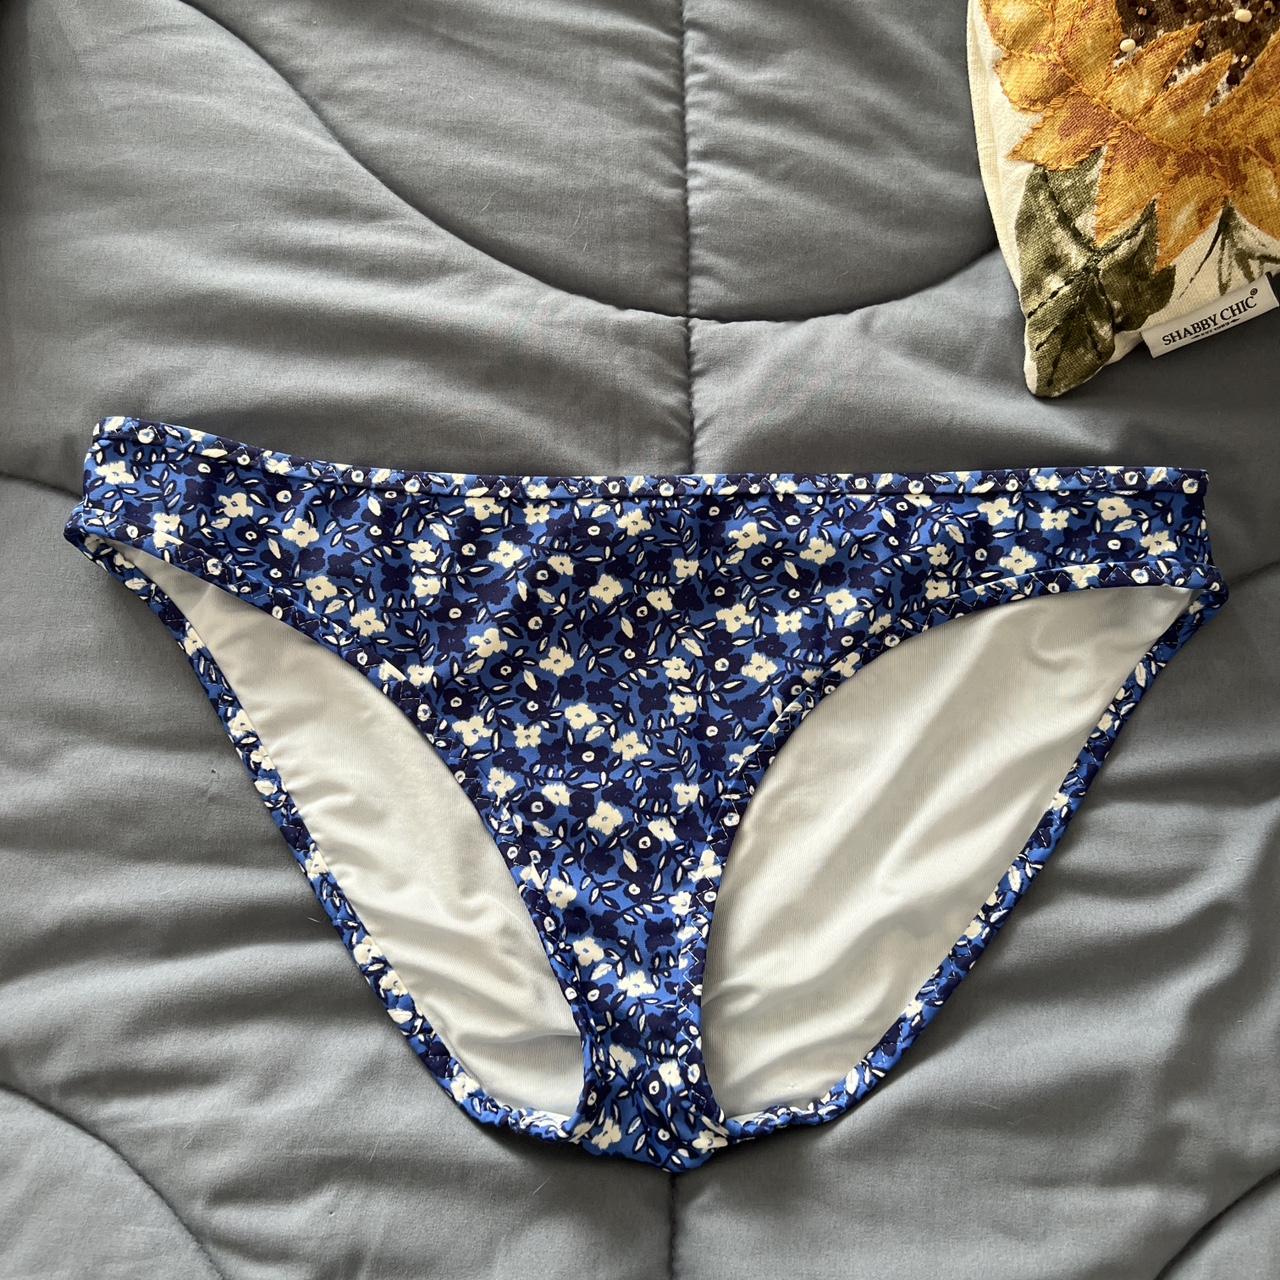 Aerie by American Eagle. Periwinkle colored - Depop